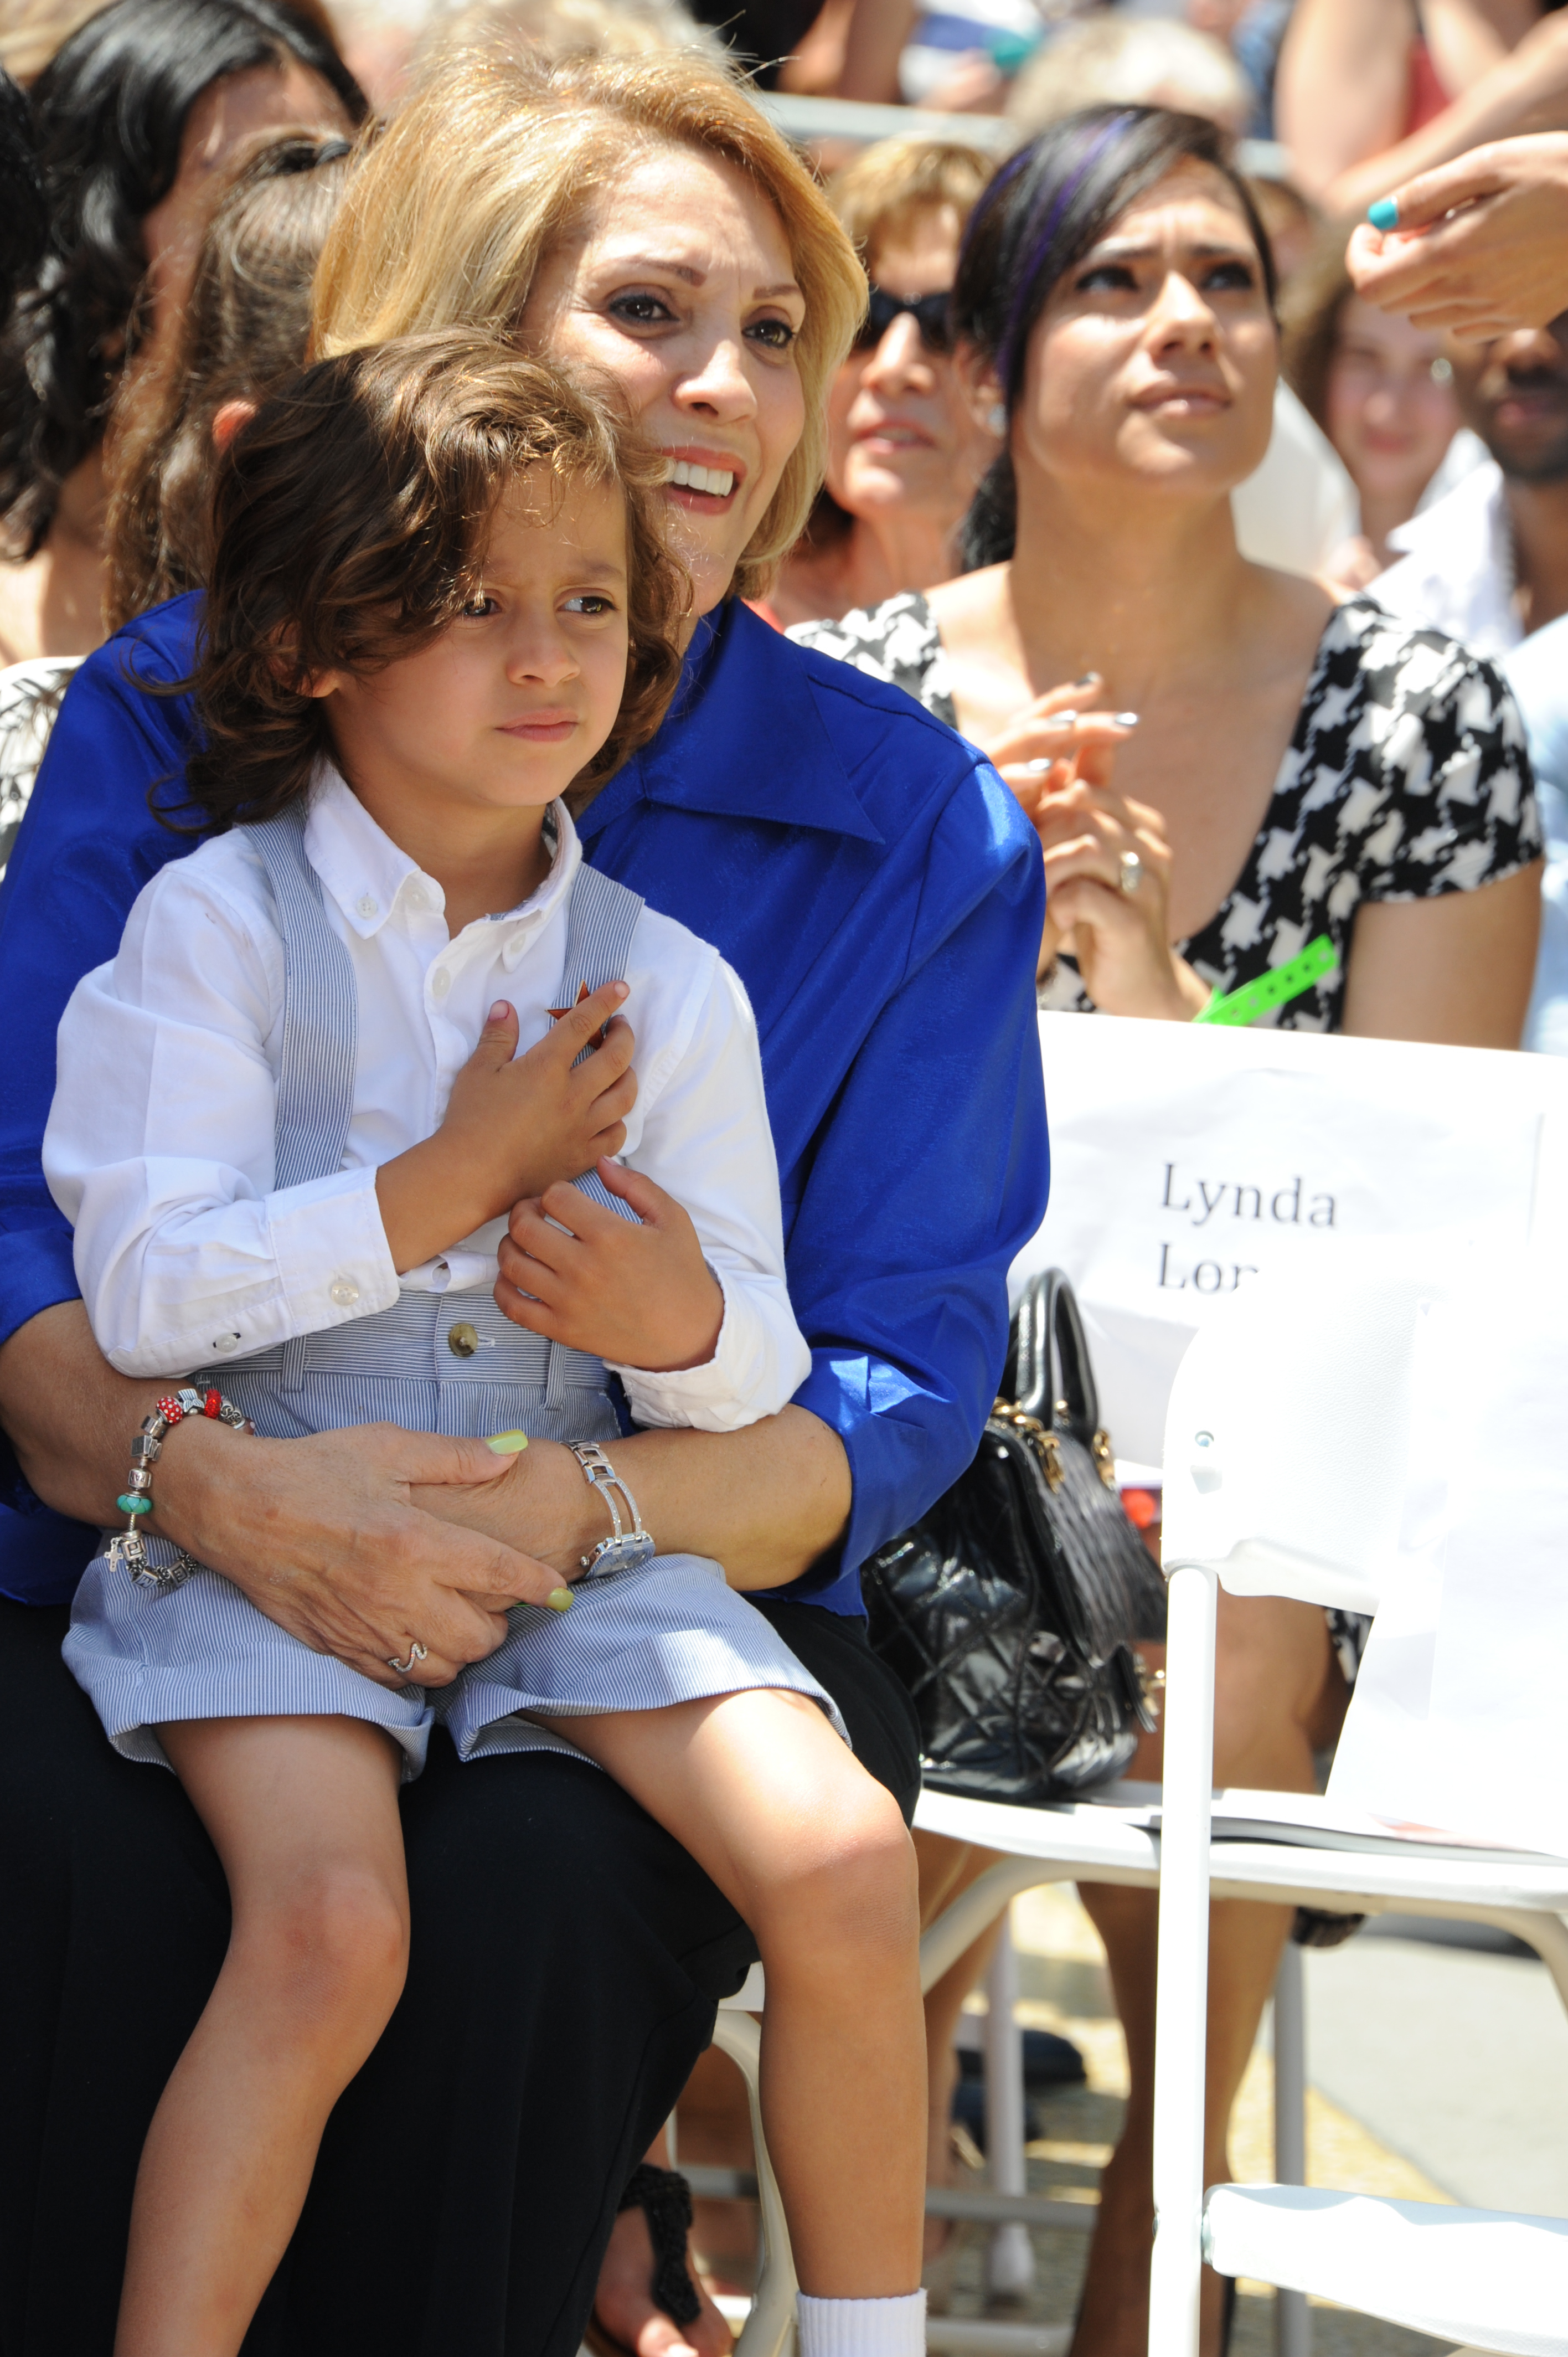 Max Anthony and Guadalupe Lopez attend Jennifer Lopez’s Star on The Hollywood Walk of Fame ceremony, on June 20, 2013. | Source: Getty Images